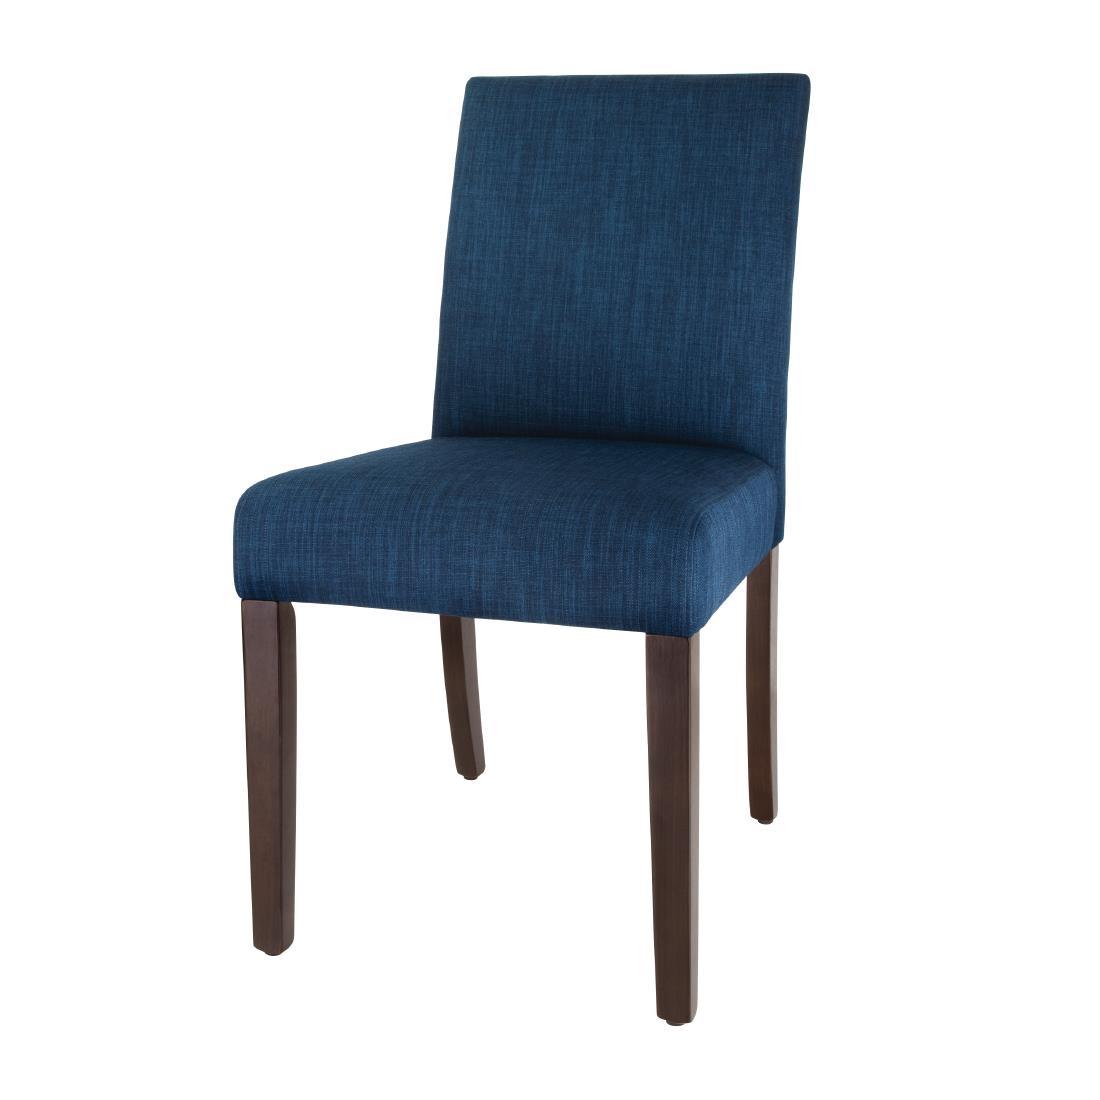 Bolero Chiswick Dining Chairs Royal Blue (Pack of 2) - DT697  - 1